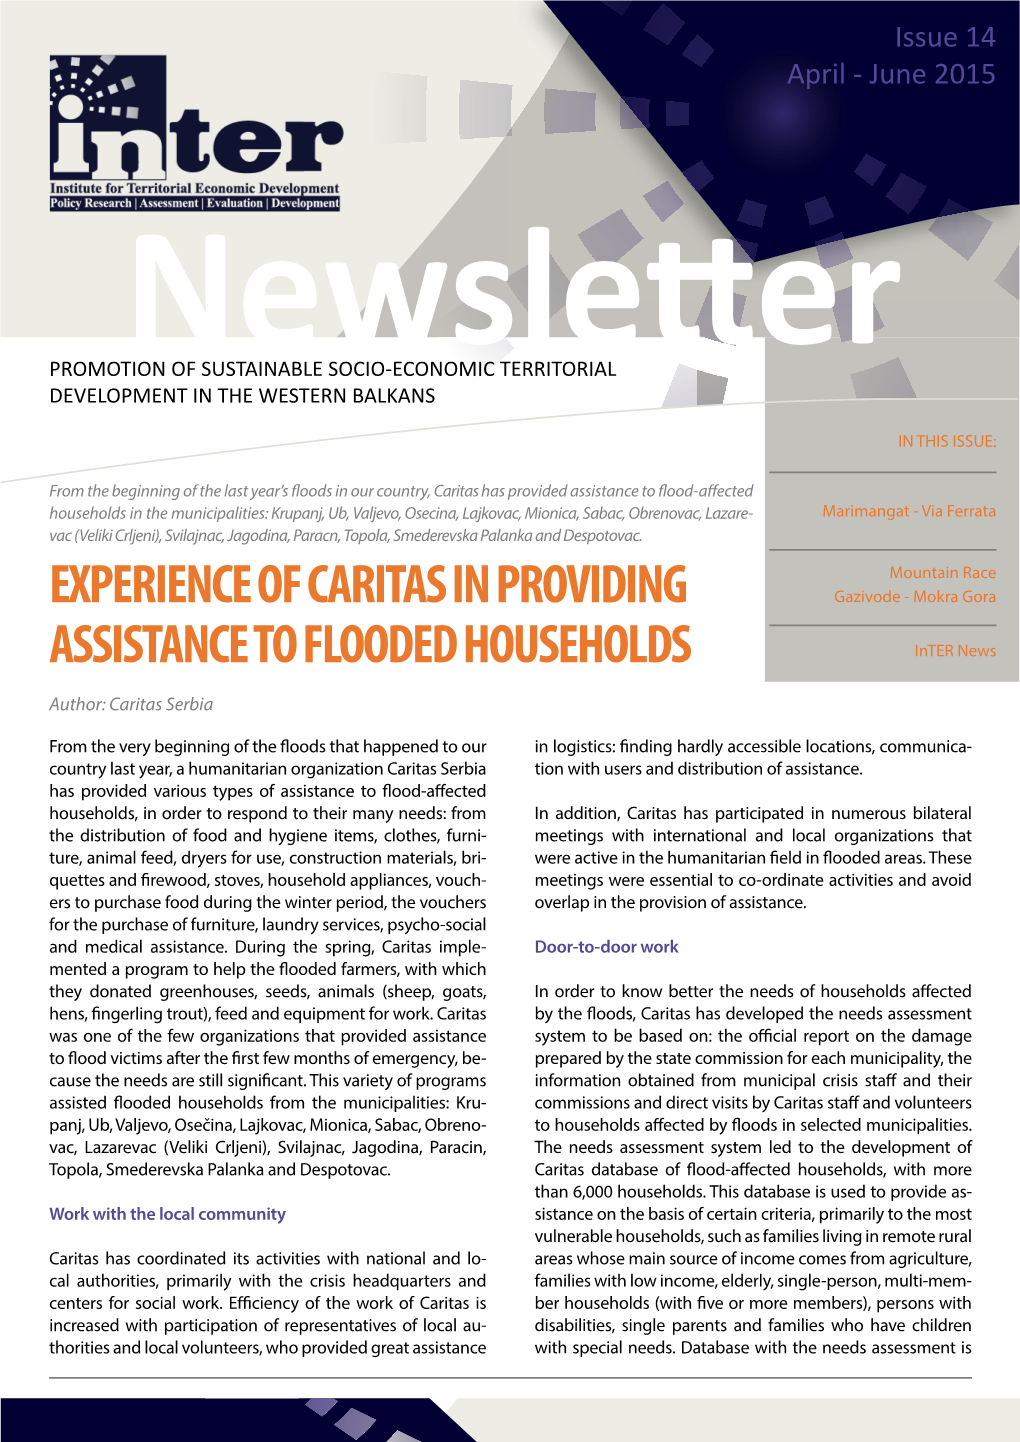 Experience of Caritas in Providing Assistance to Flooded Households